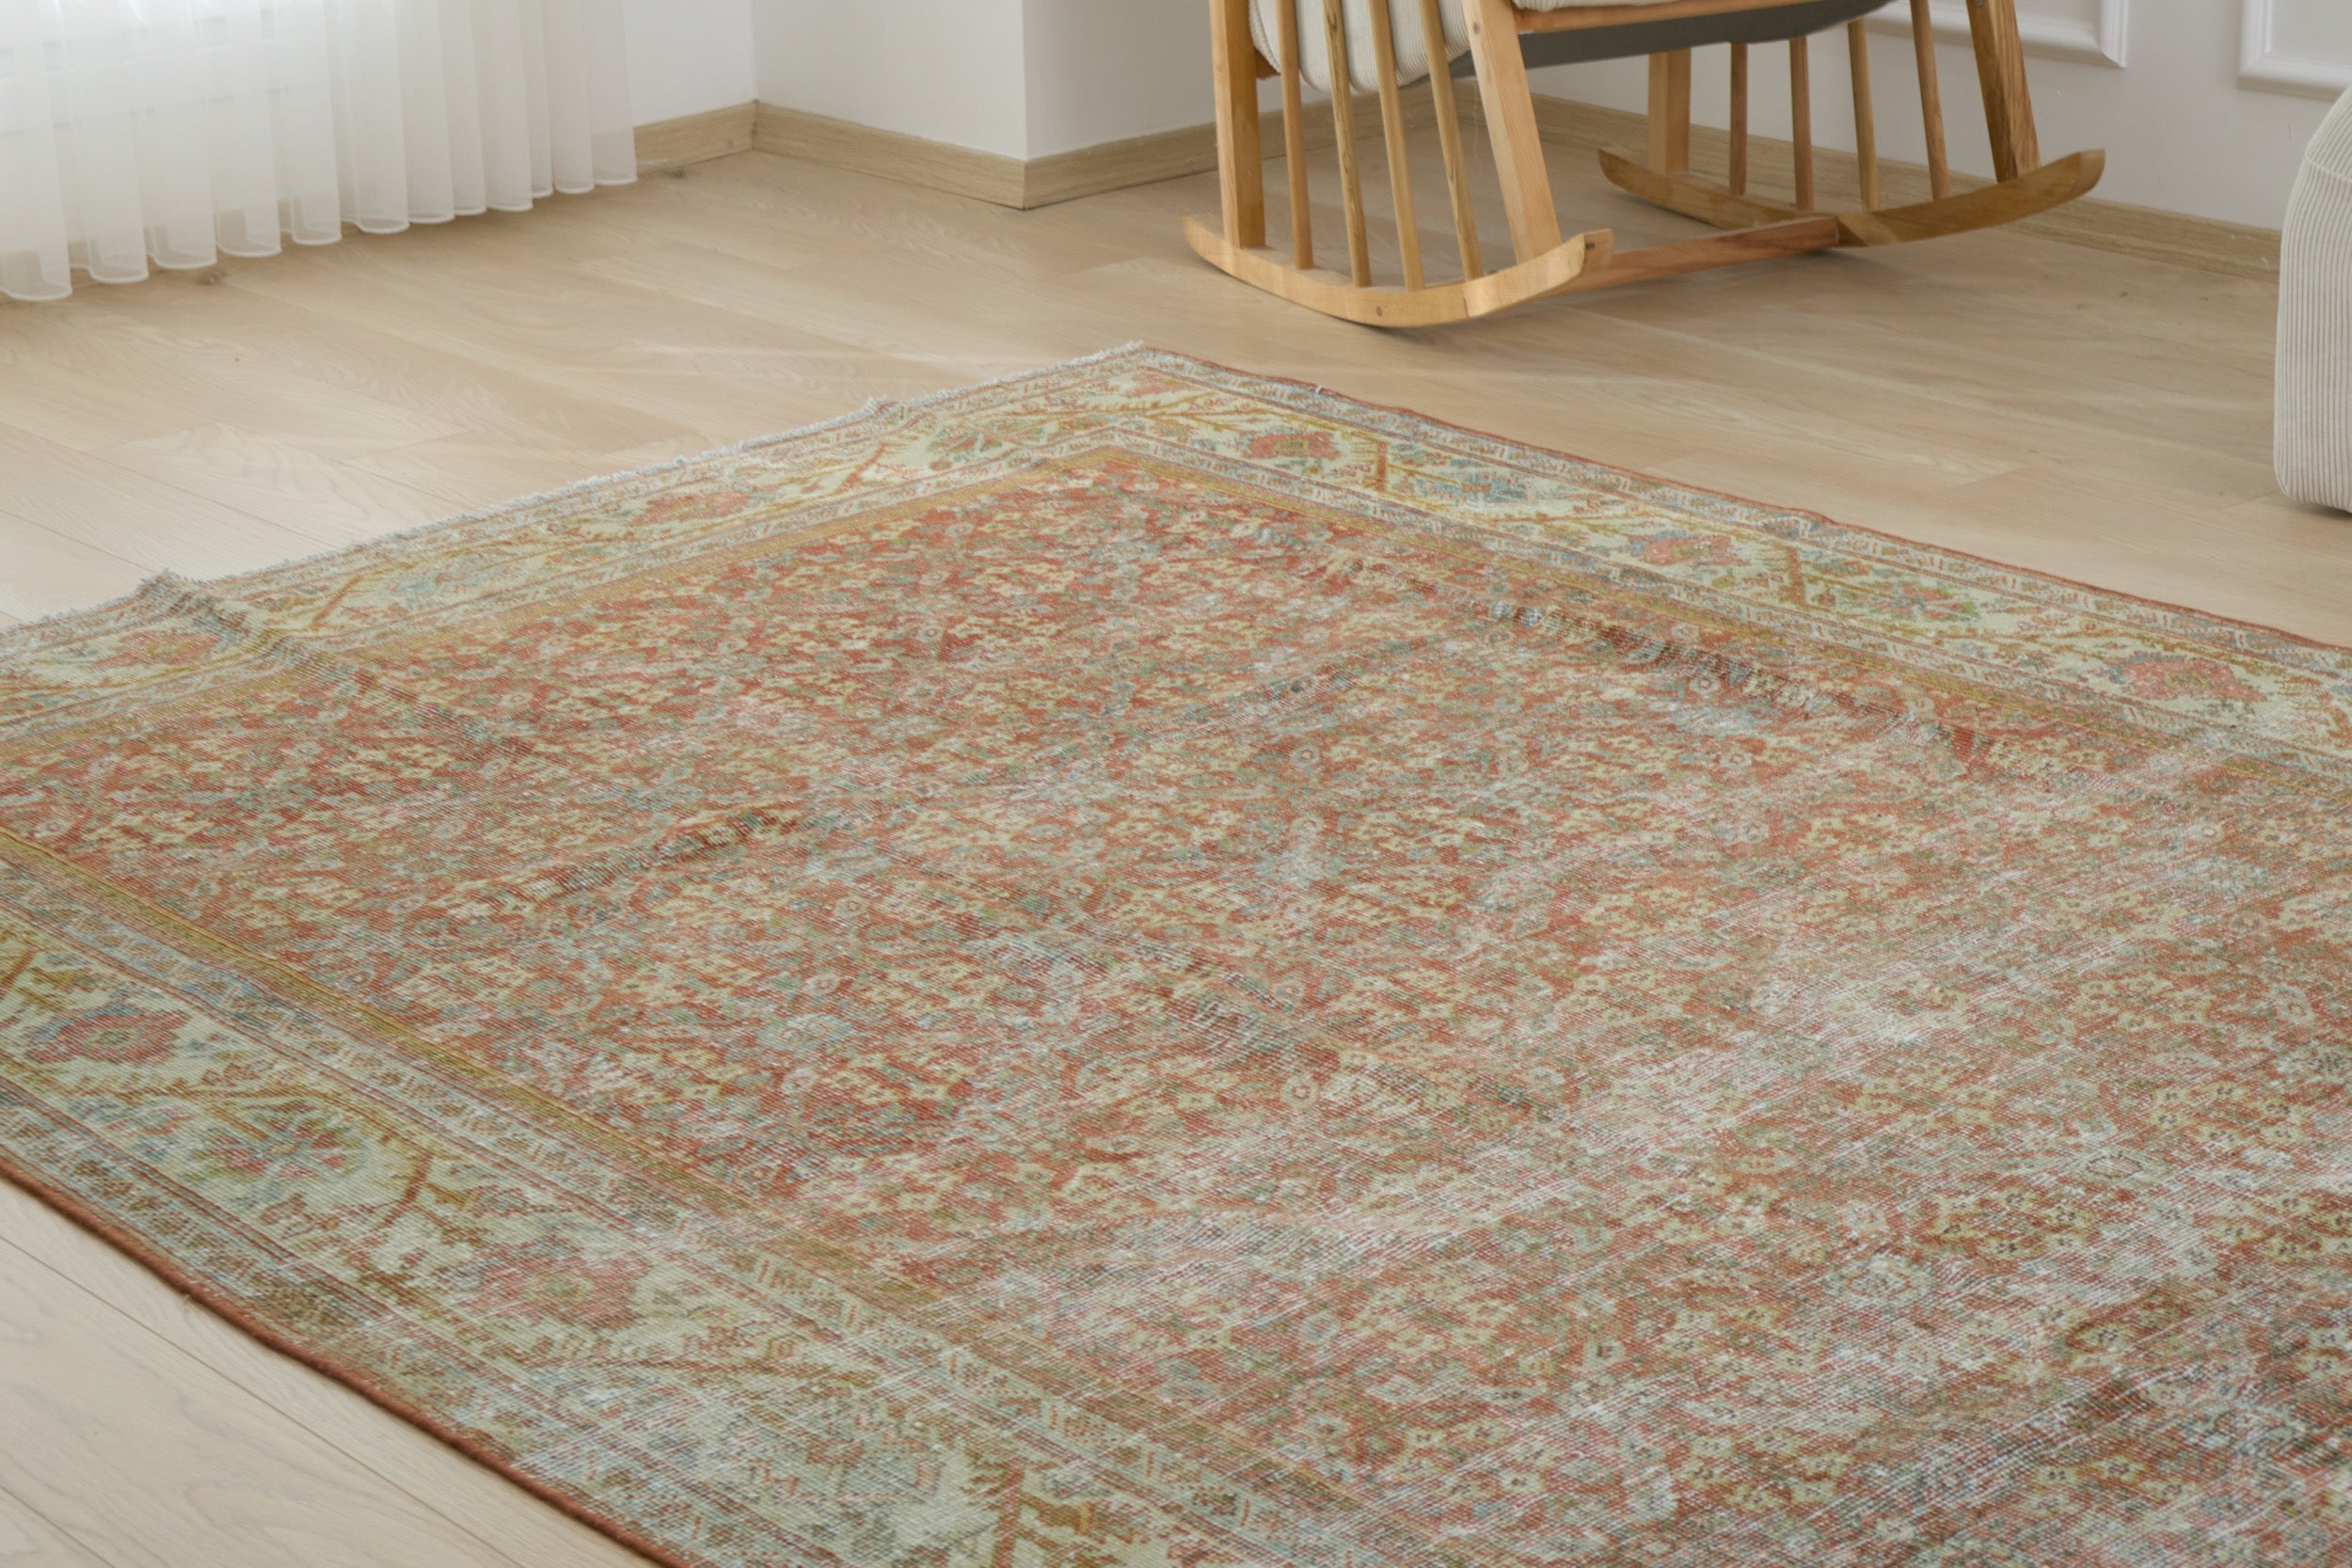 Paciencia - Where Tradition Meets Elegance | Kuden Rugs